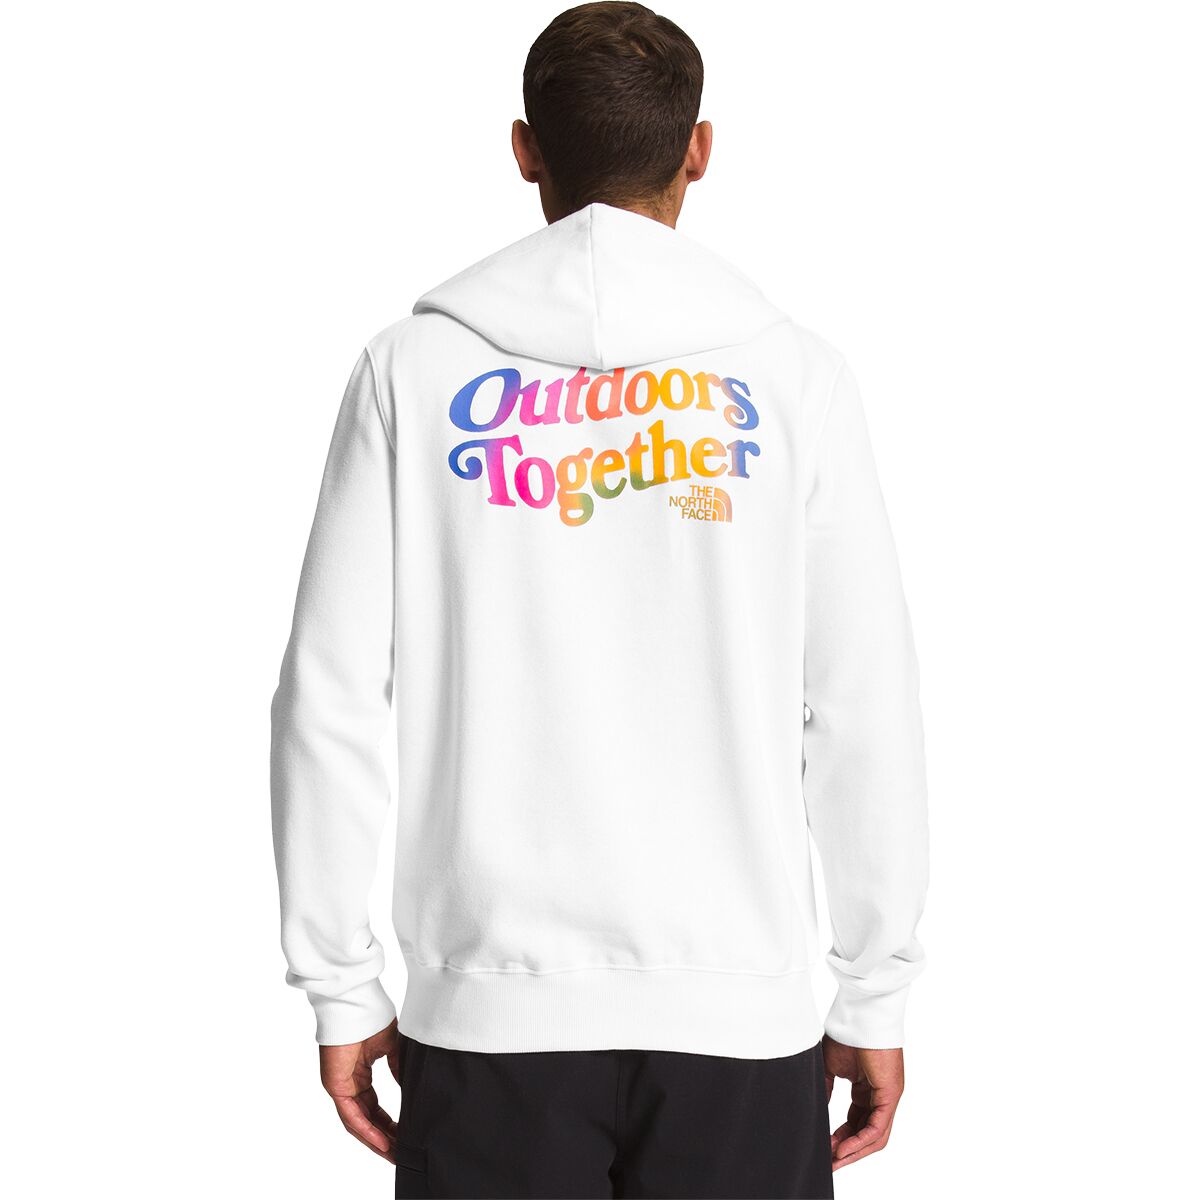 The North Face Pride Pullover Hoodie - Men's